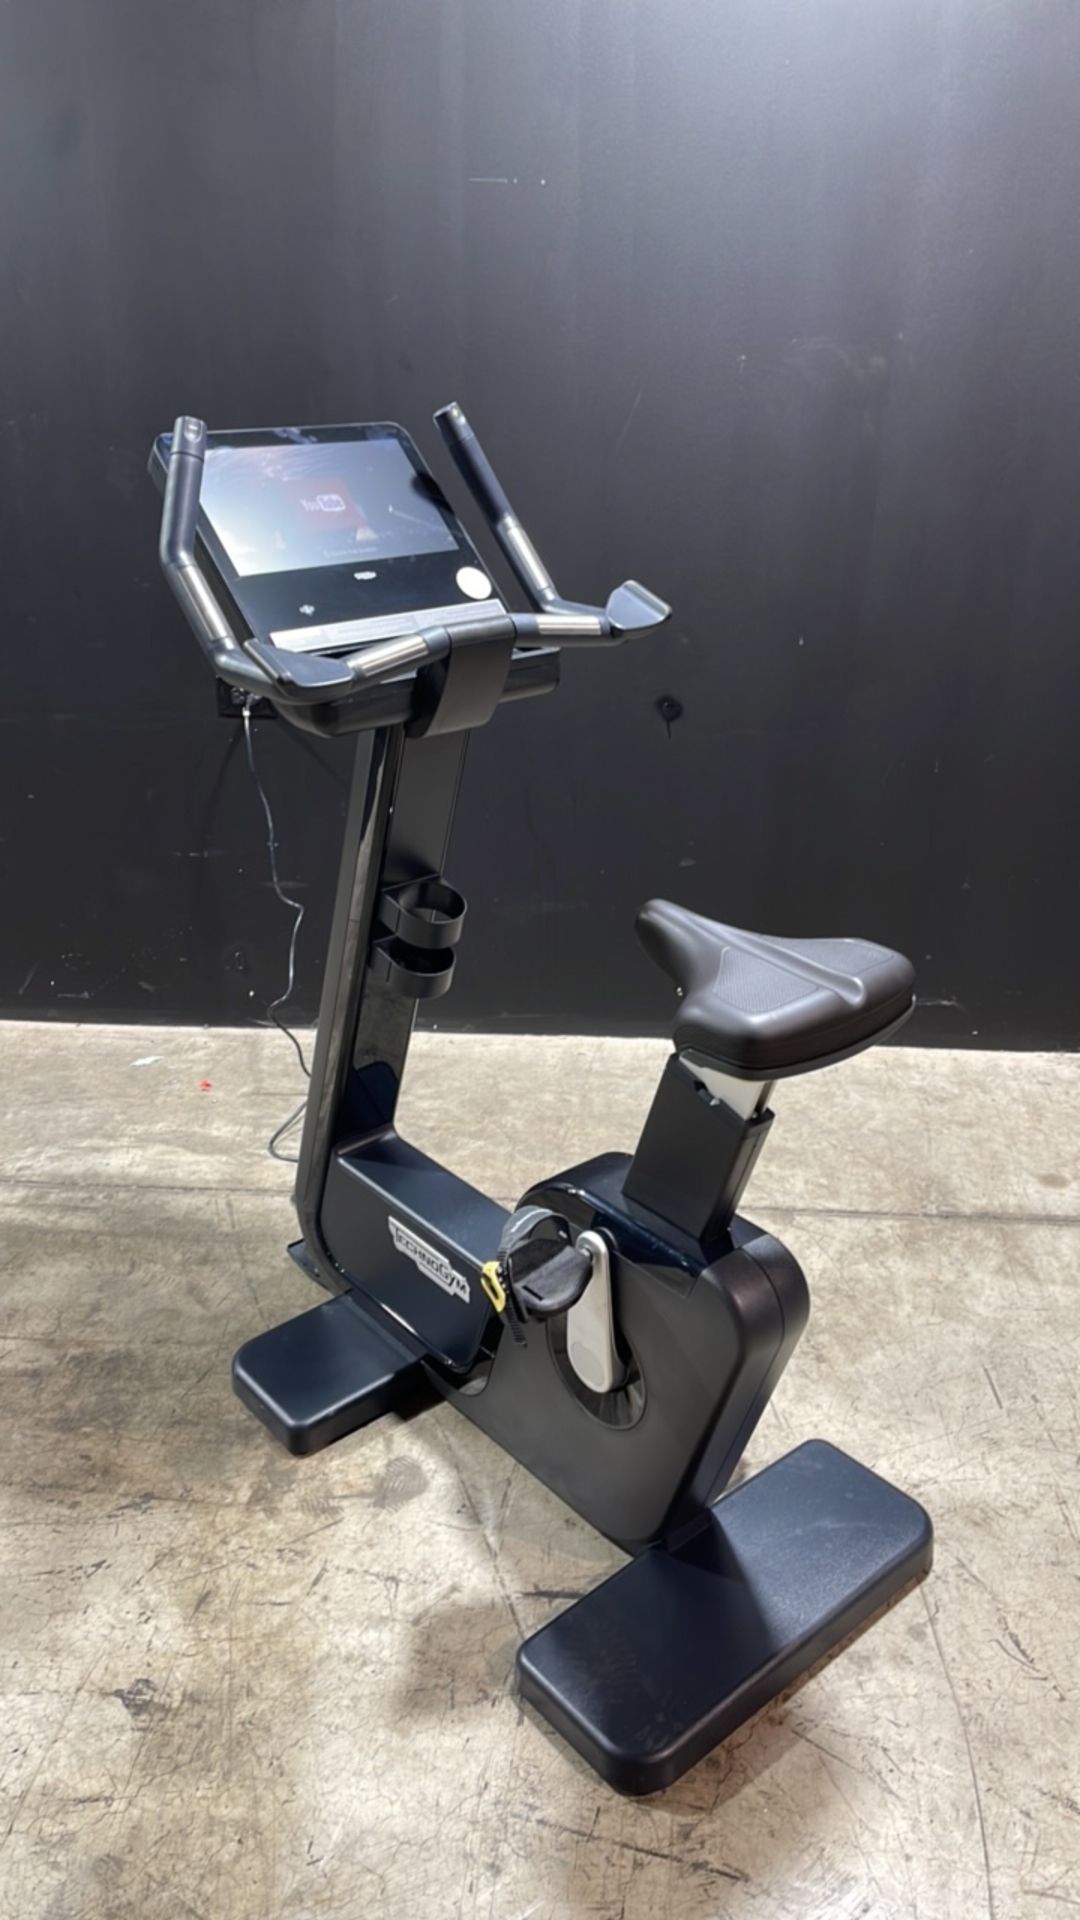 TECHNOGYM EXERCISE BIKE WITH TOUCH SCREEN MONITOR